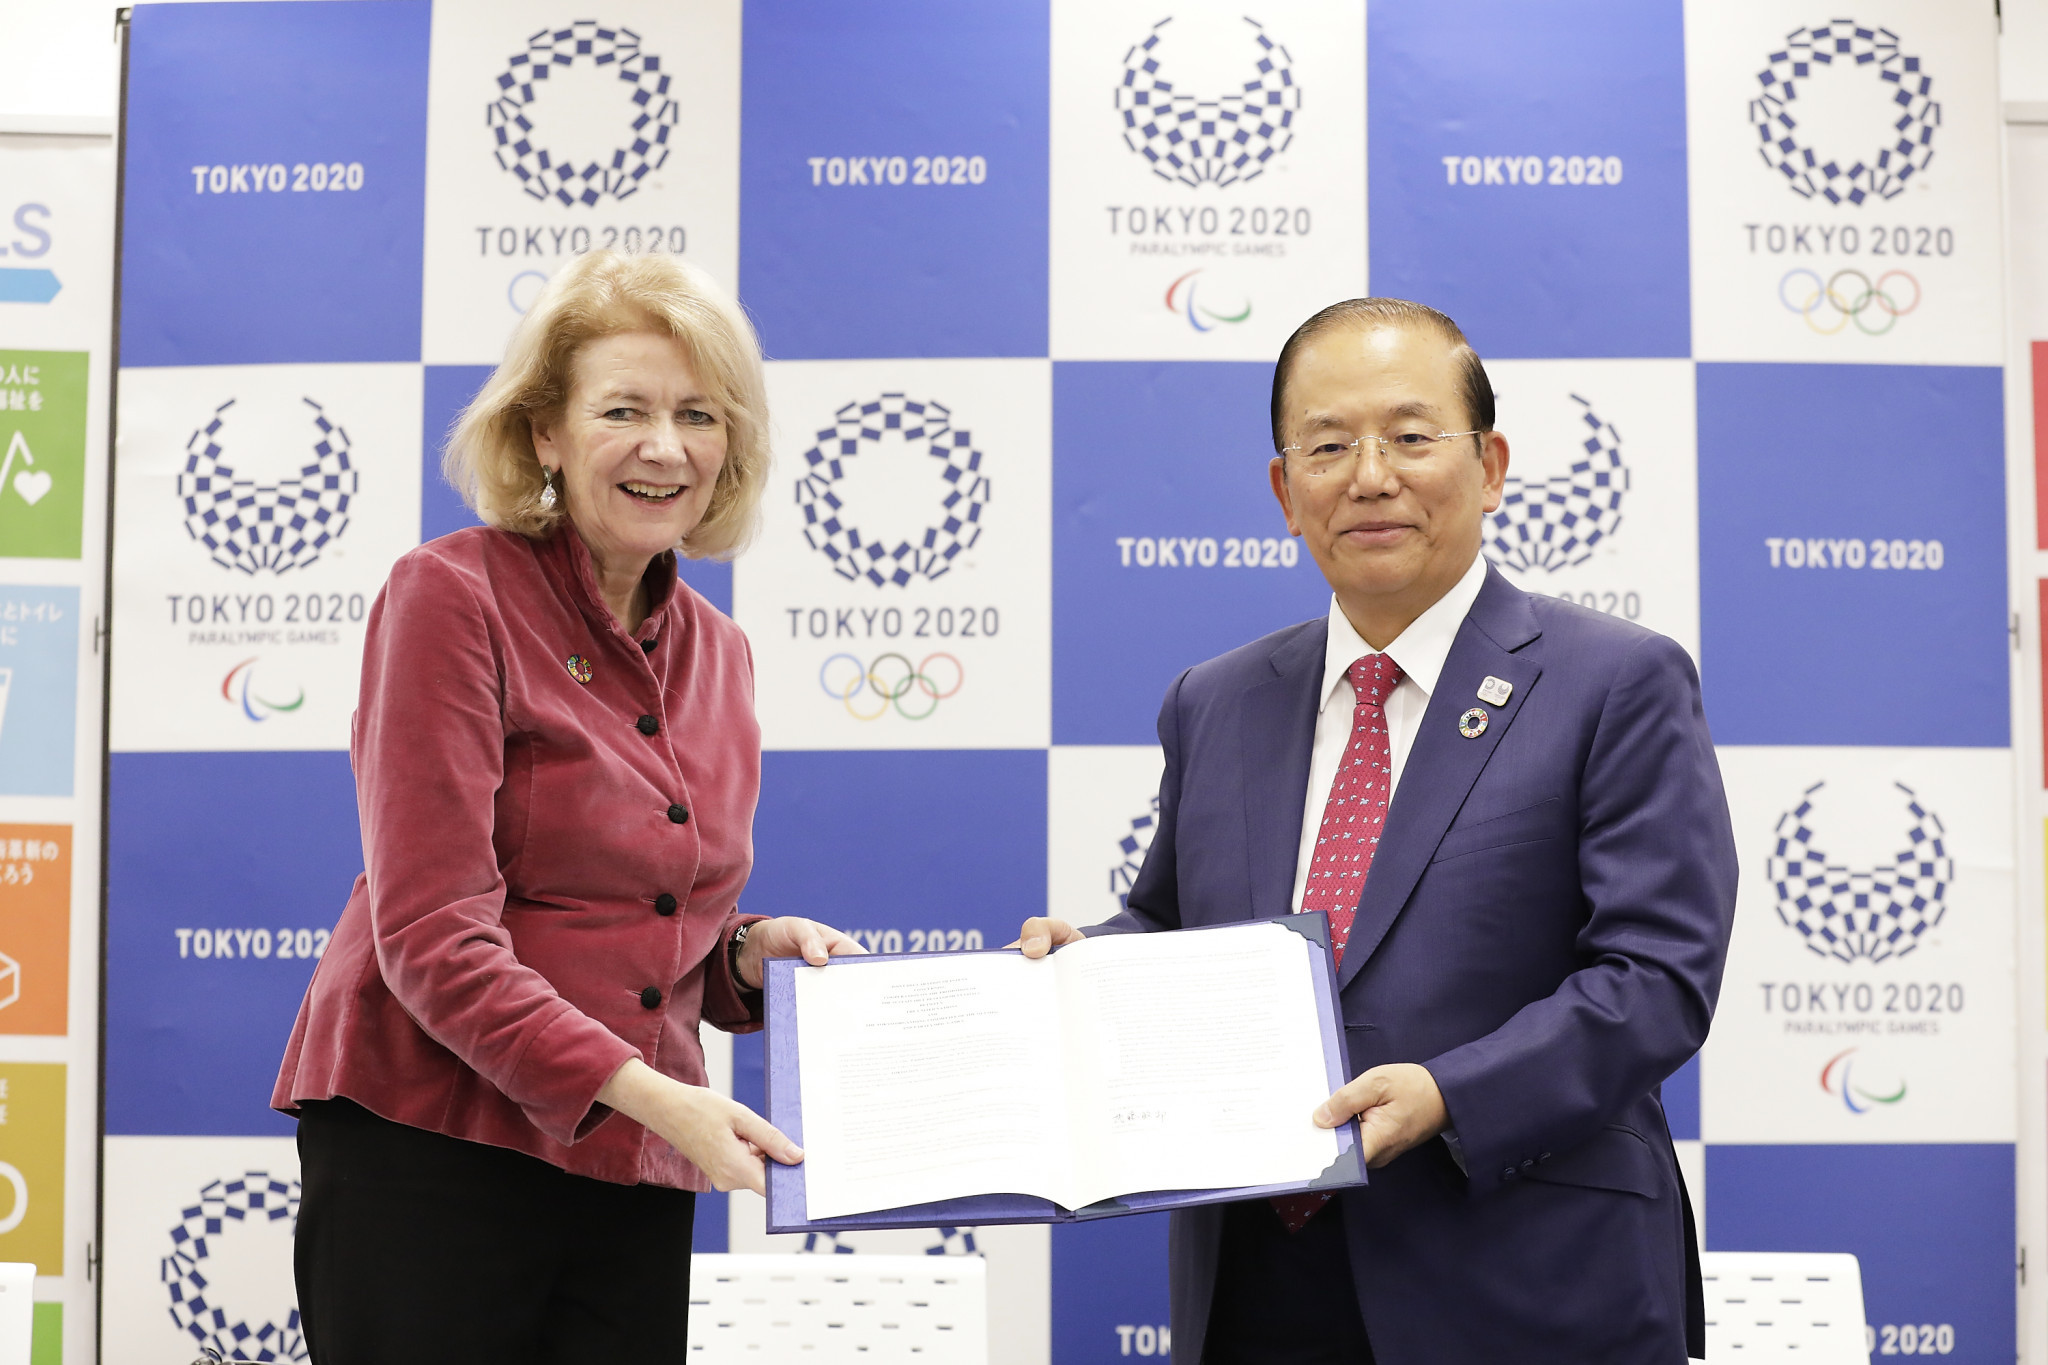 Tokyo 2020 and UN sign letter of intent promoting sustainable development in sport